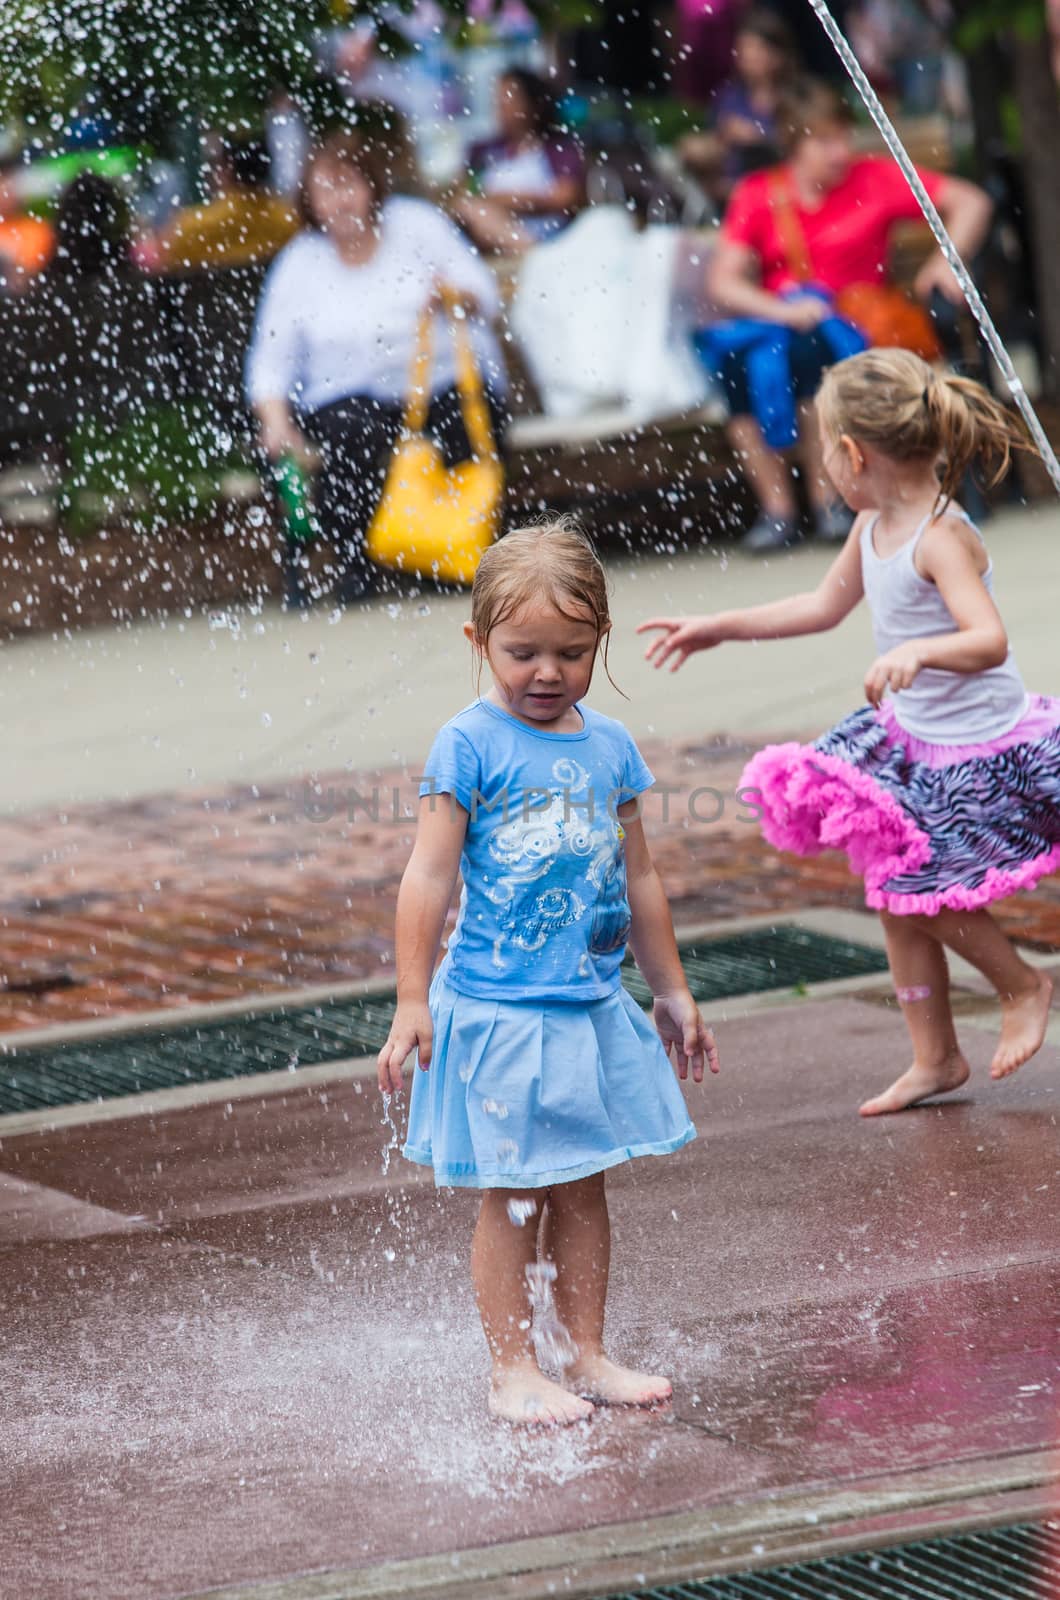 DES MOINES, IA /USA - AUGUST 10: Unidentified young girl plays in fountain at the Iowa State Fair on August 10, 2014 in Des Moines, Iowa, USA.